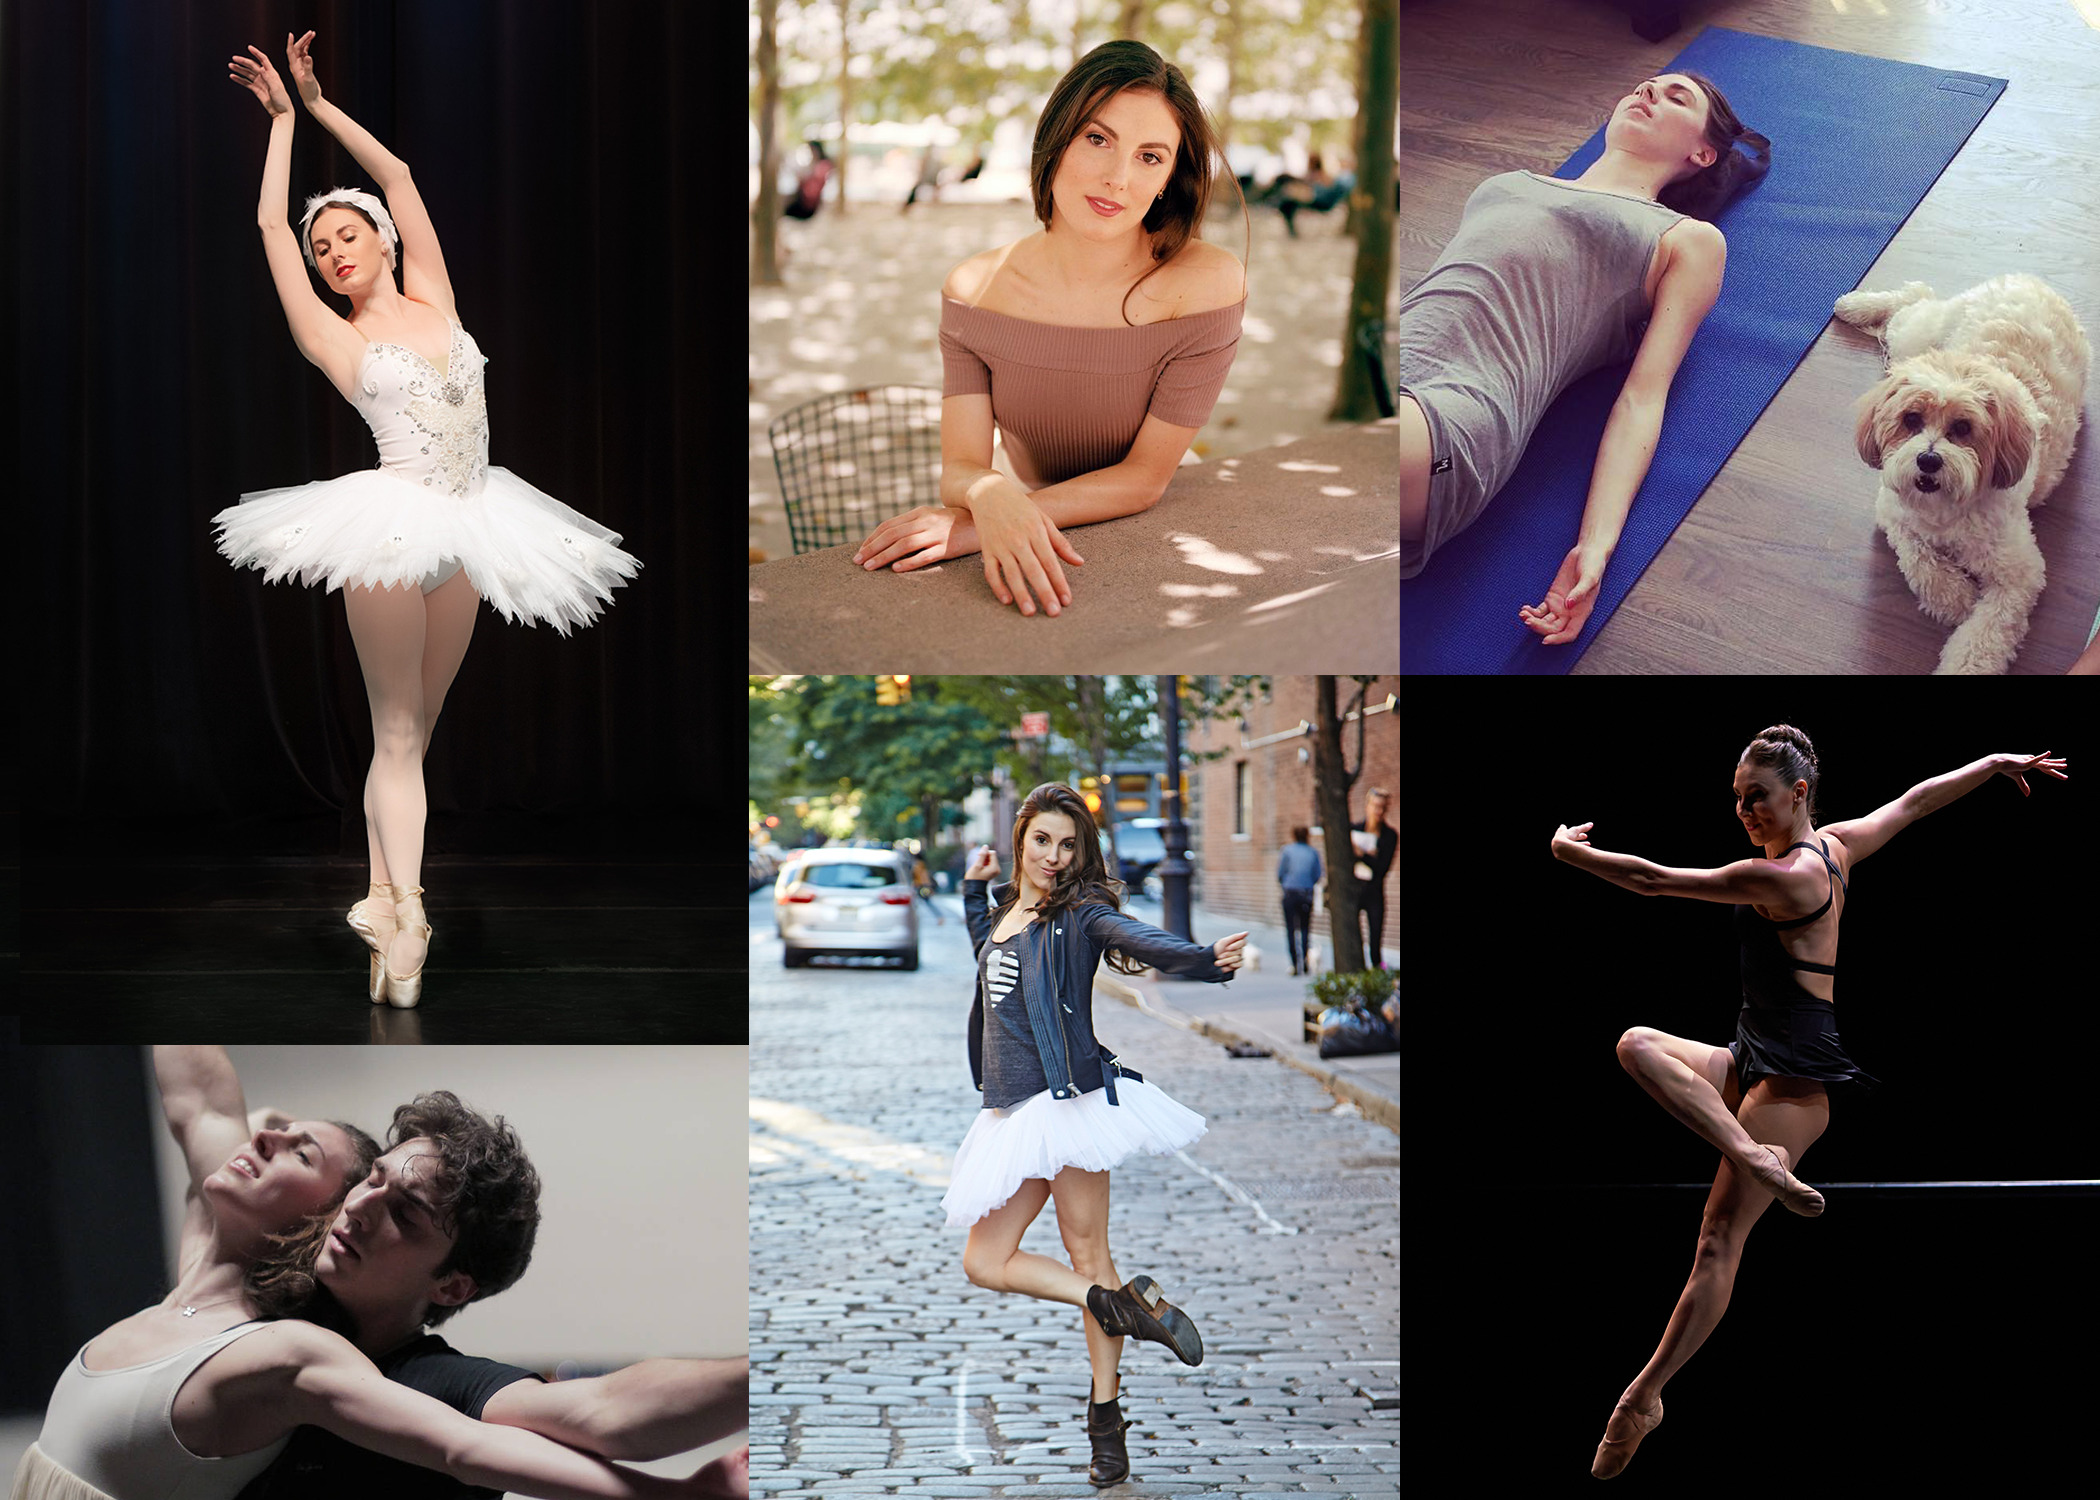 A montage of six photos show Tiler Peck dancing in various roles, lying on a yoga mat with her dog, and seated at a table smiling for the camera.